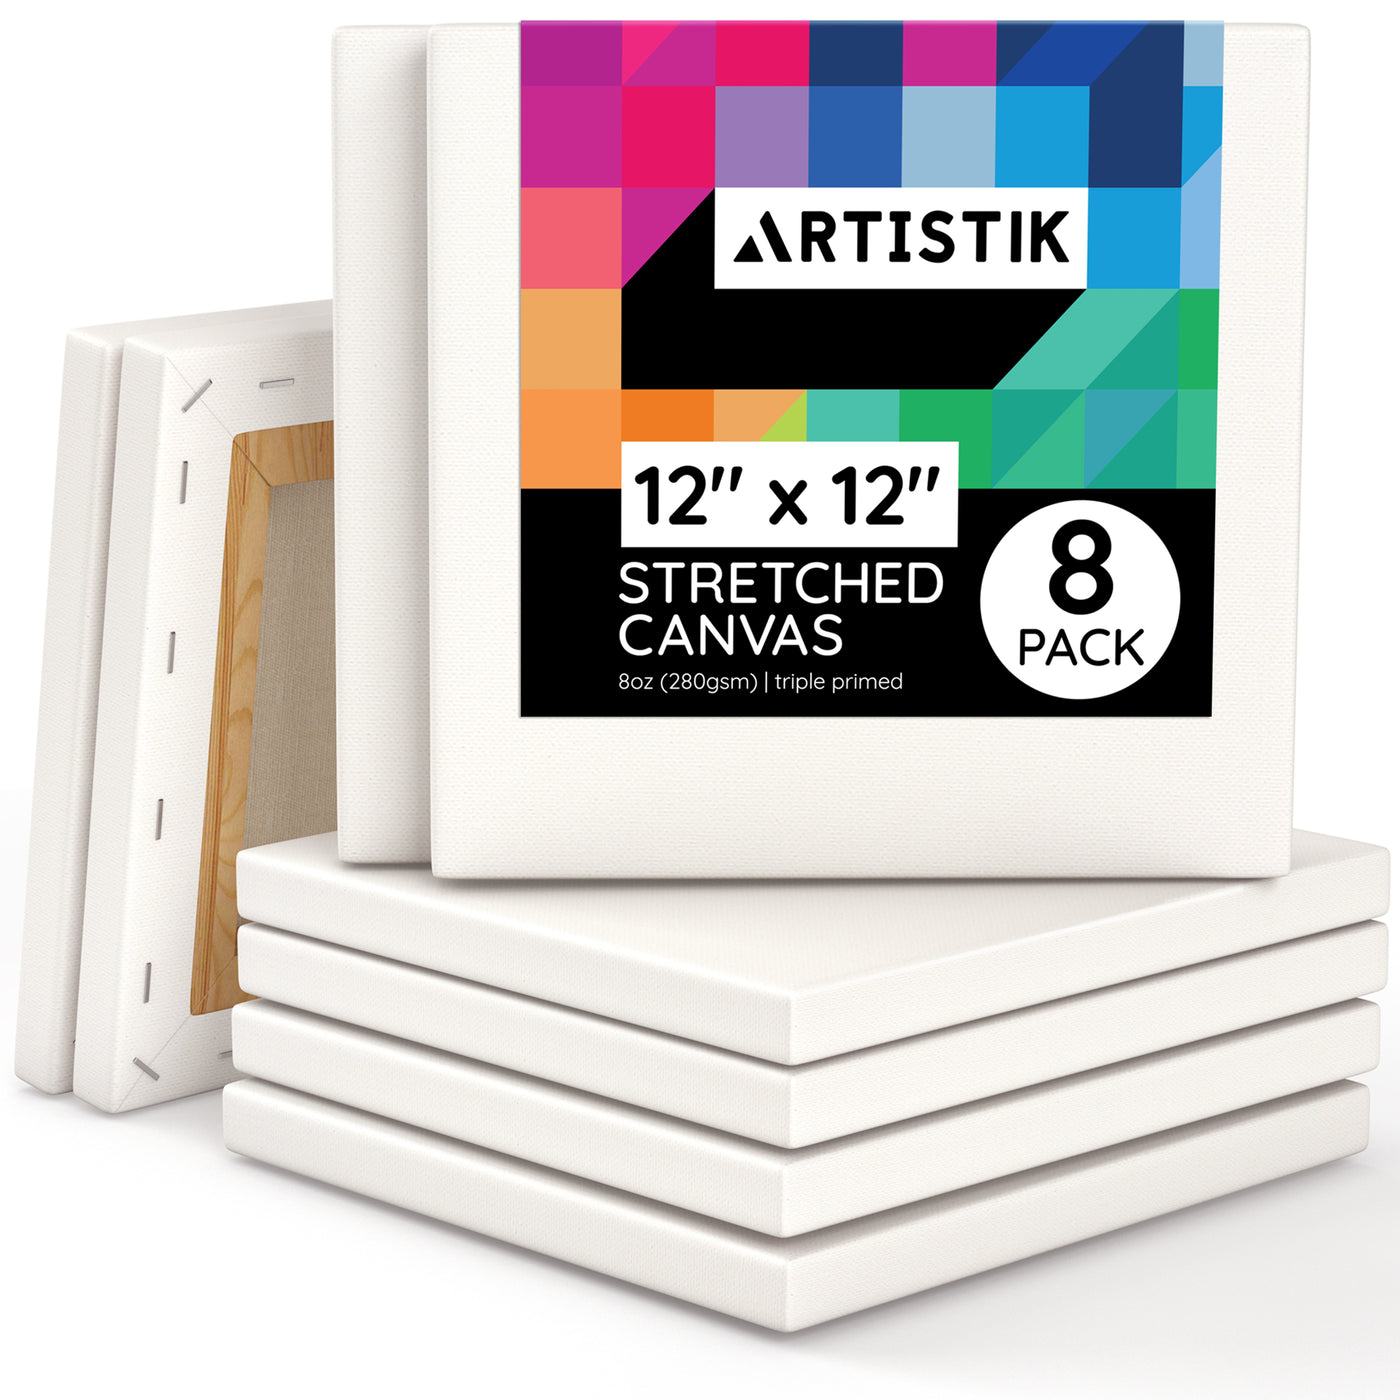 12" x 12" Stretched Canvas - 8 Pack*